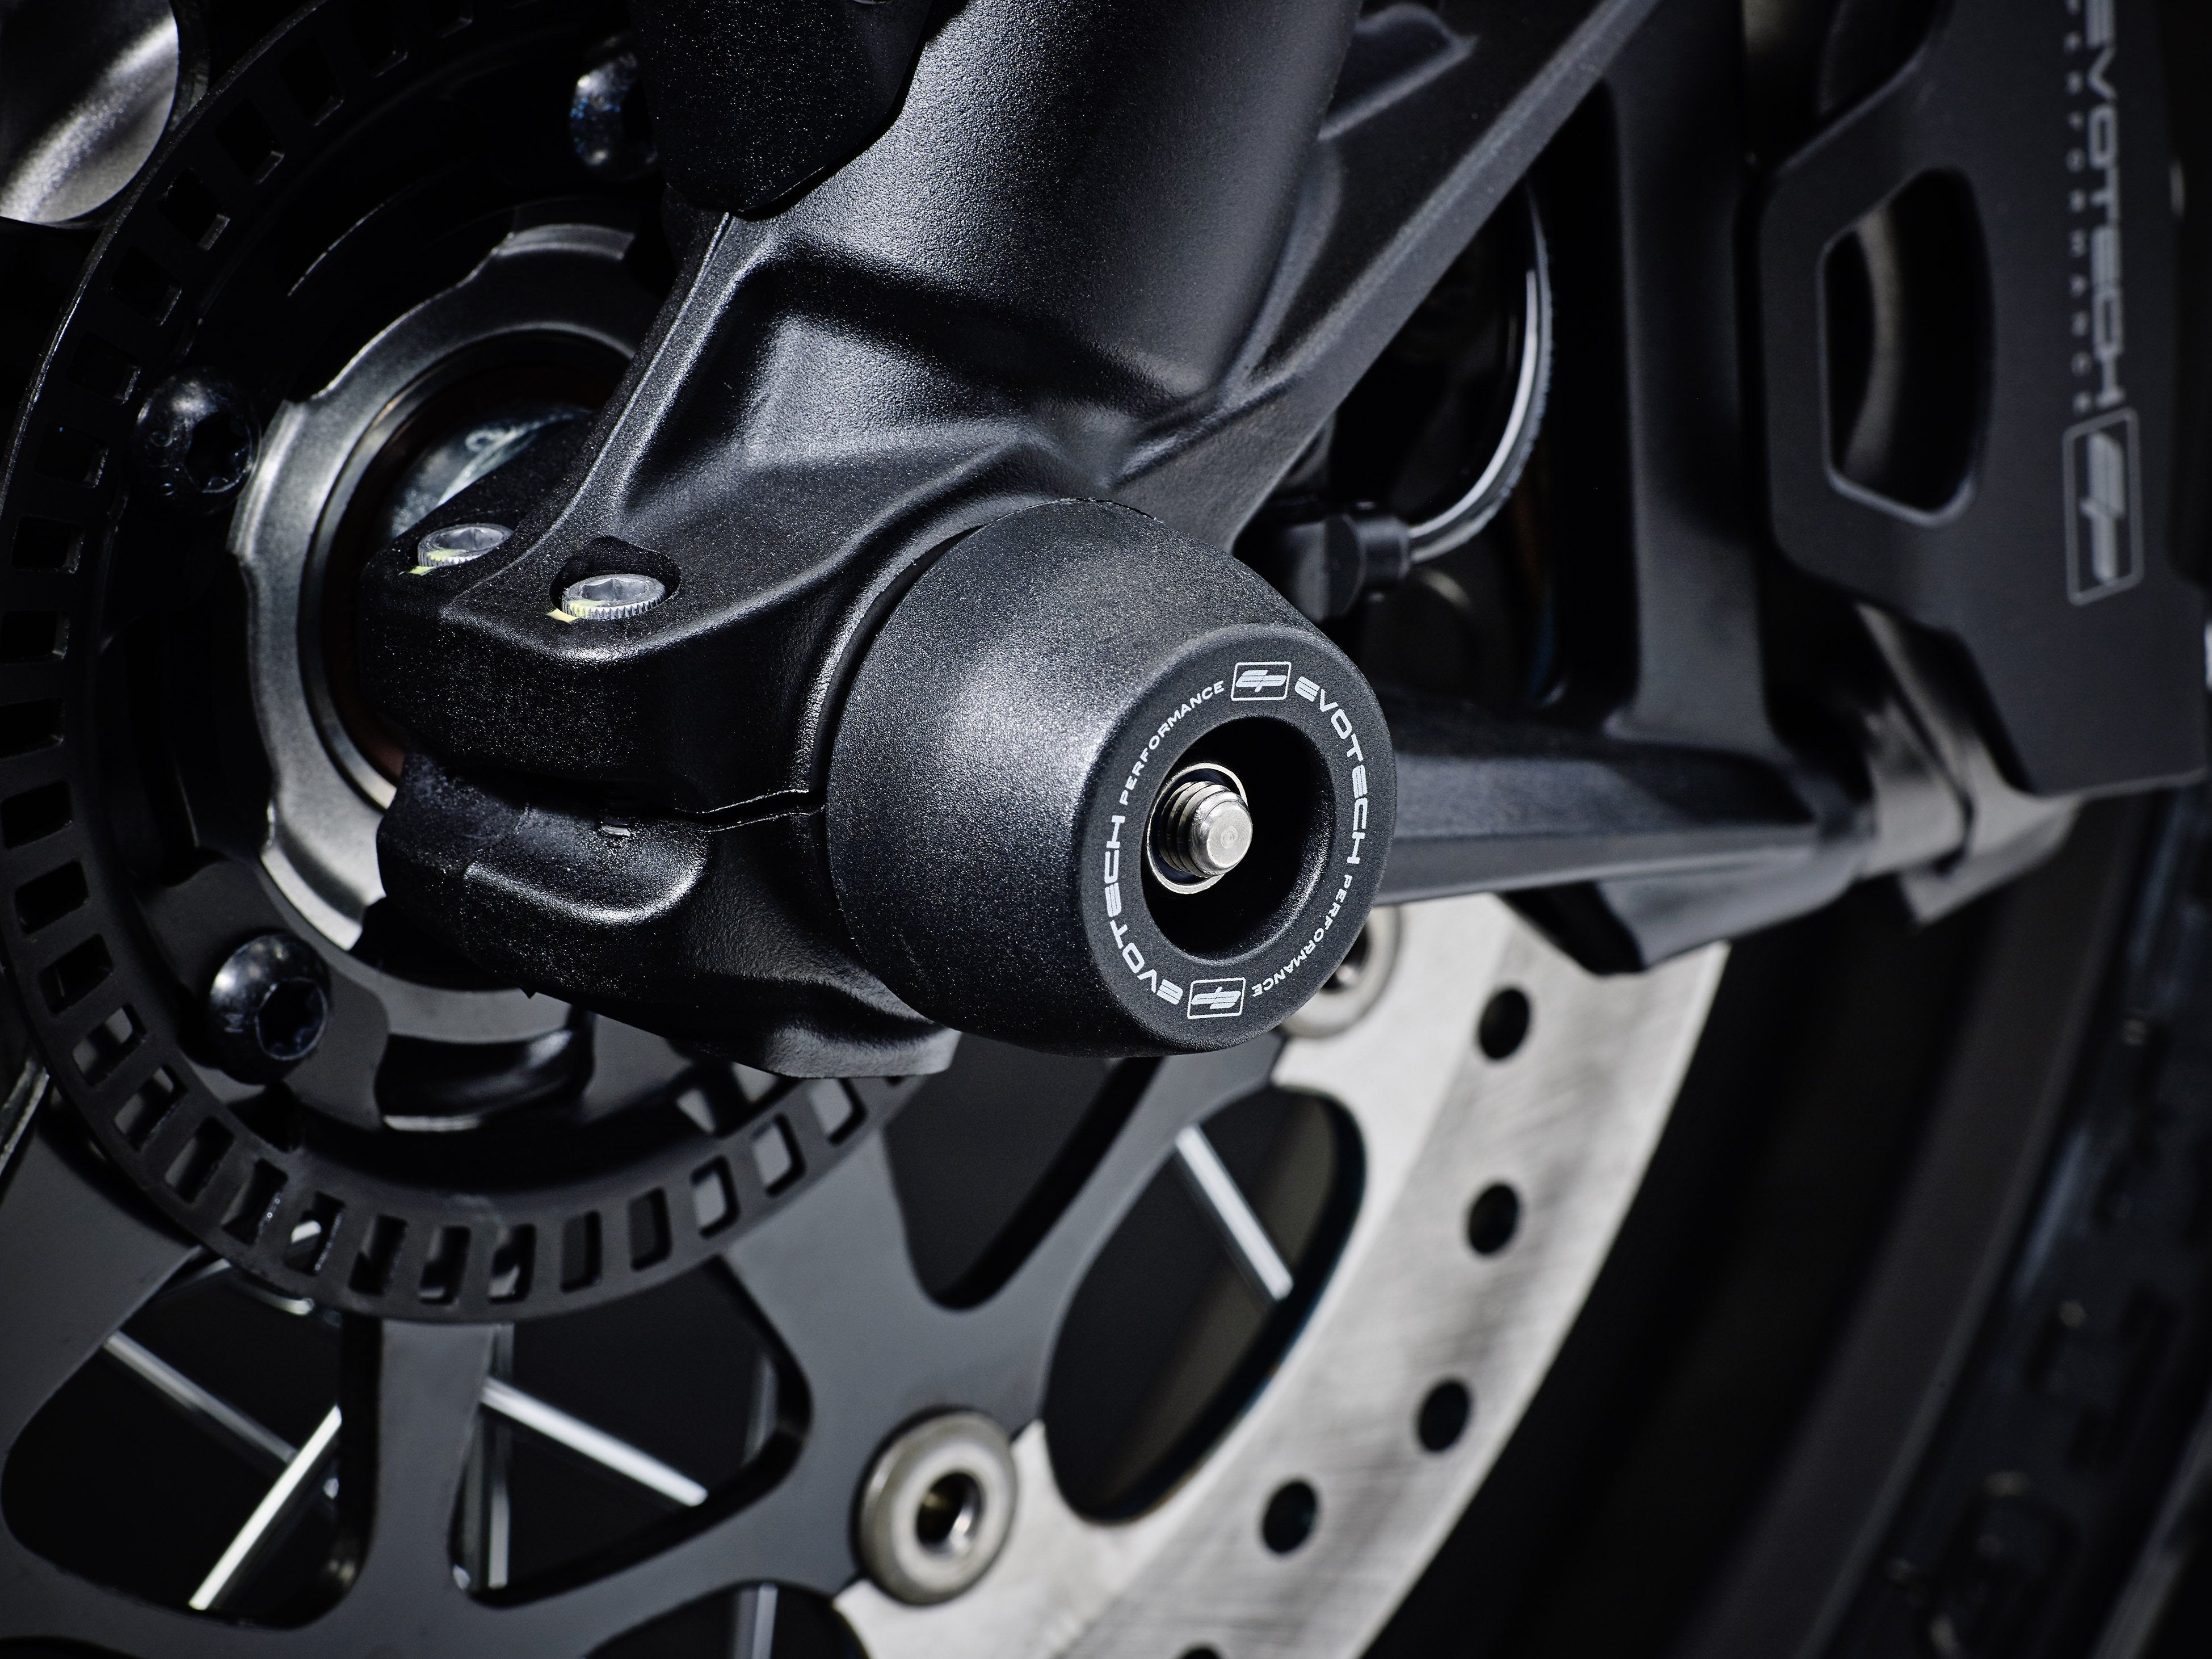 EP Spindle Bobbins Crash Protection Kit fitted to the front wheel of the Ducati Scrambler Icon Dark, guarding the front forks and brake calipers.